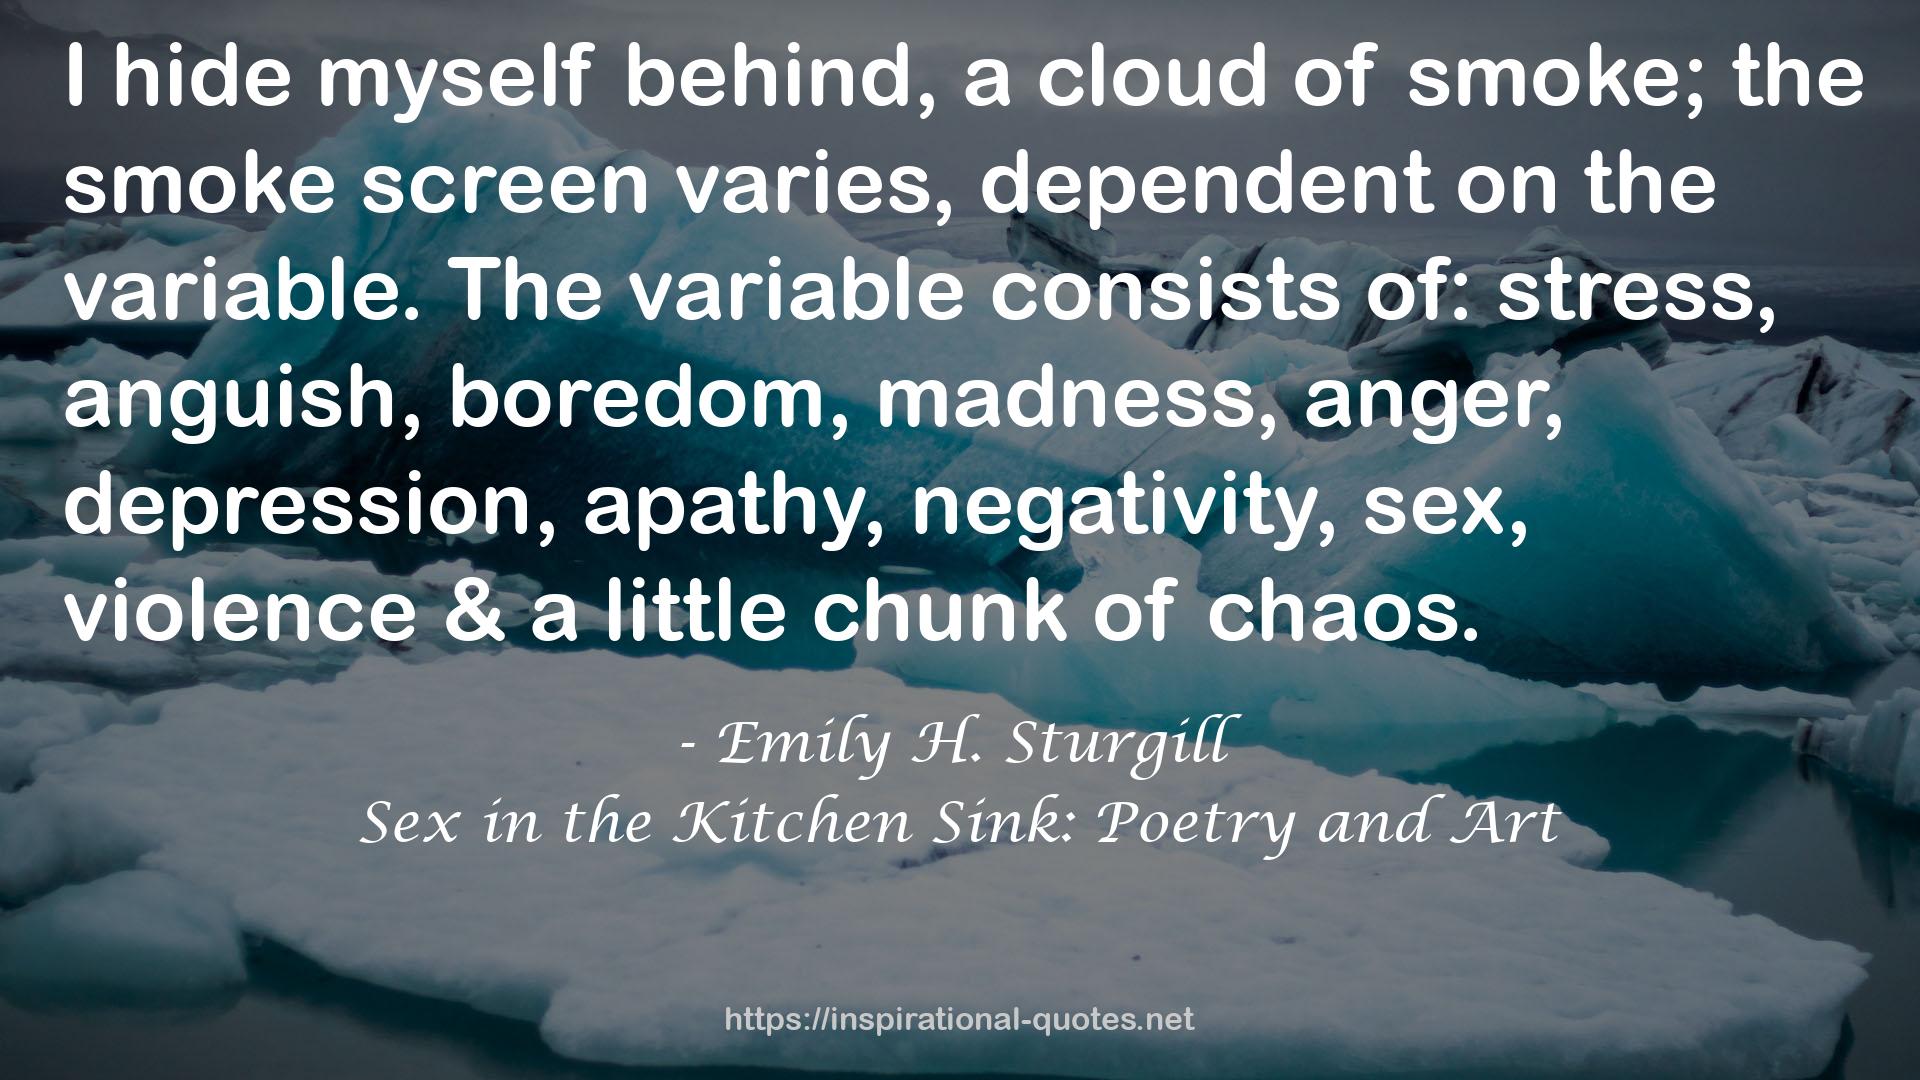 Sex in the Kitchen Sink: Poetry and Art QUOTES